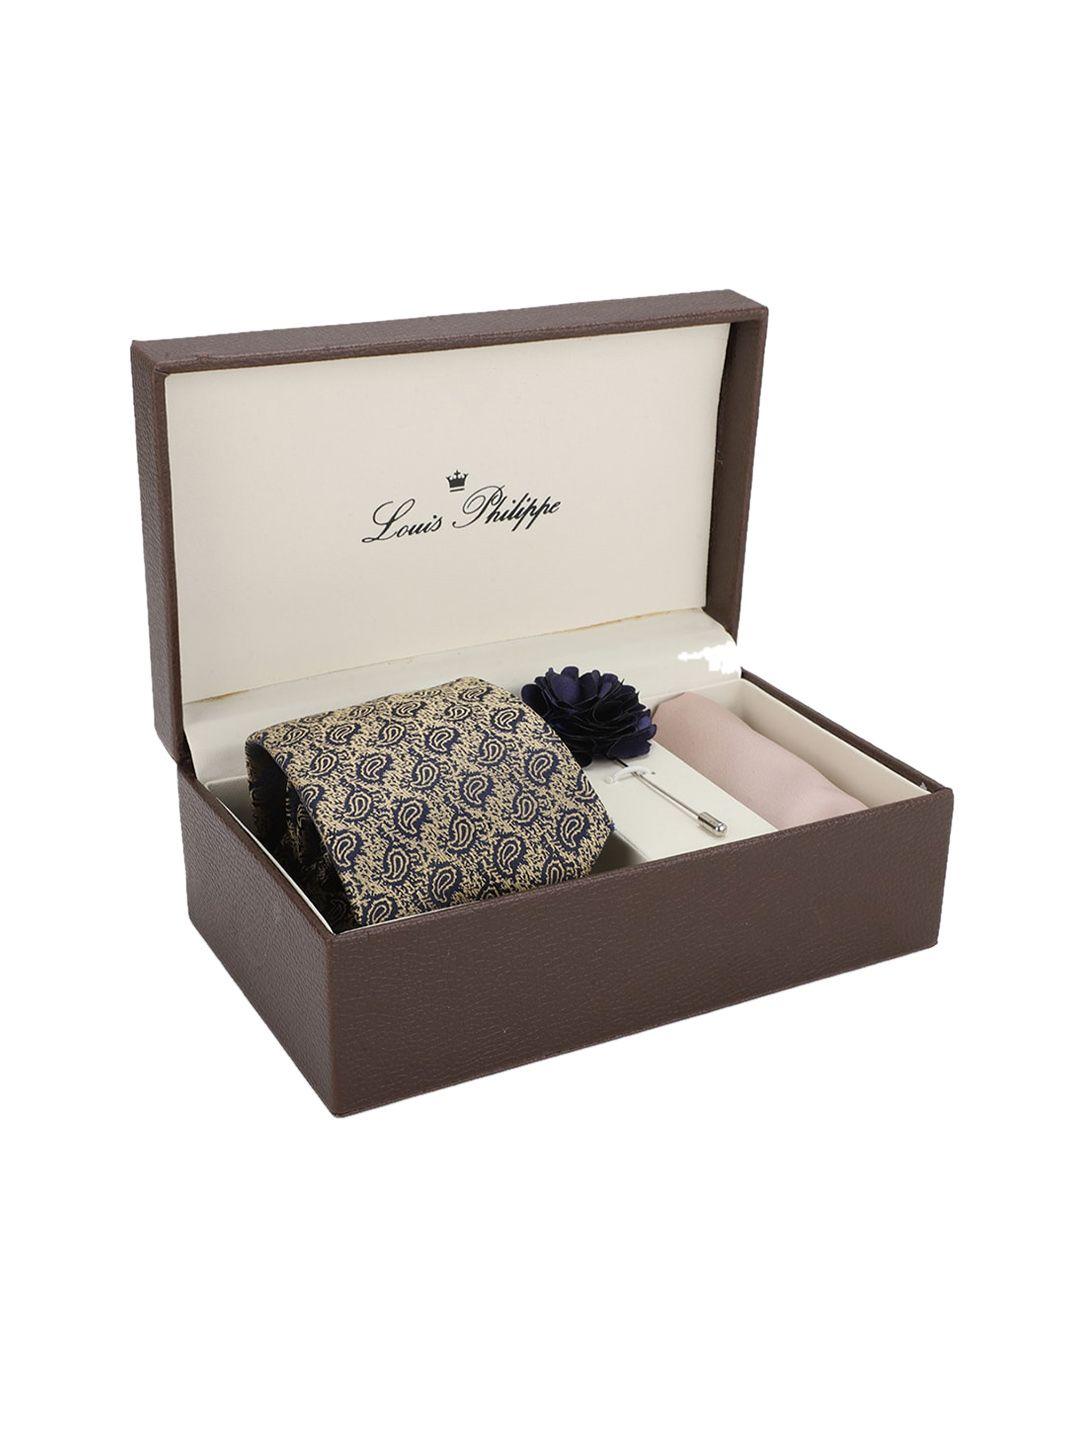 louis philippe men blue & brown paisley printed accessory gift set